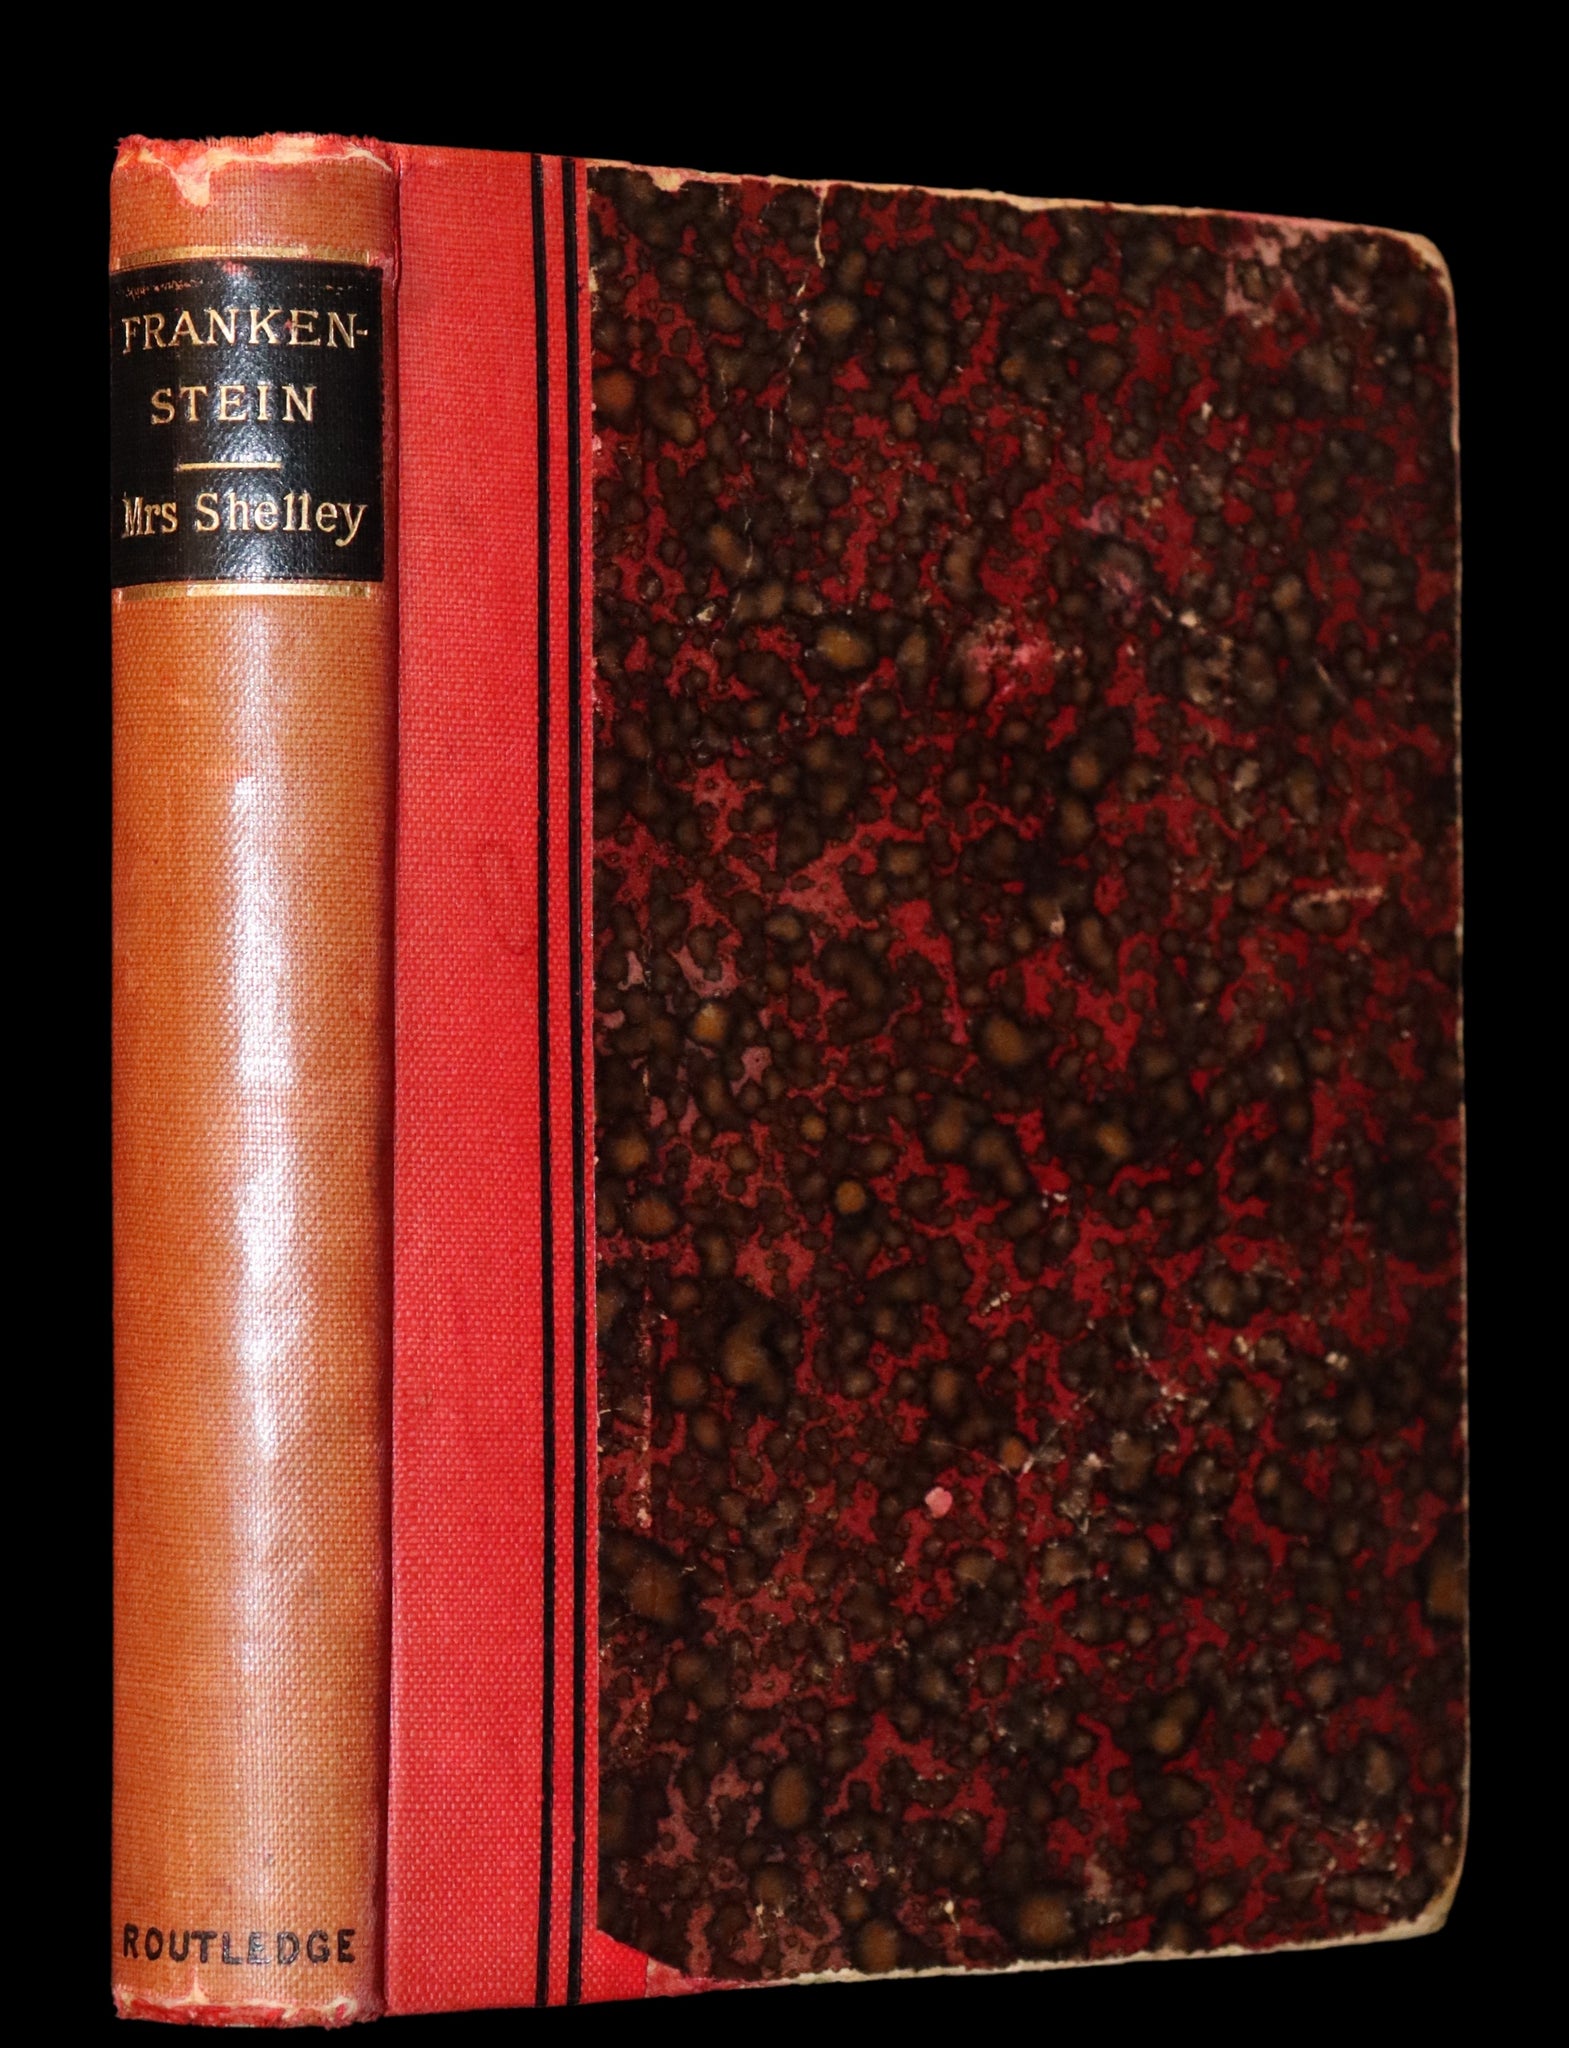 1891 Rare Victorian Book - FRANKENSTEIN or The Modern Prometheus by Mary Shelley.